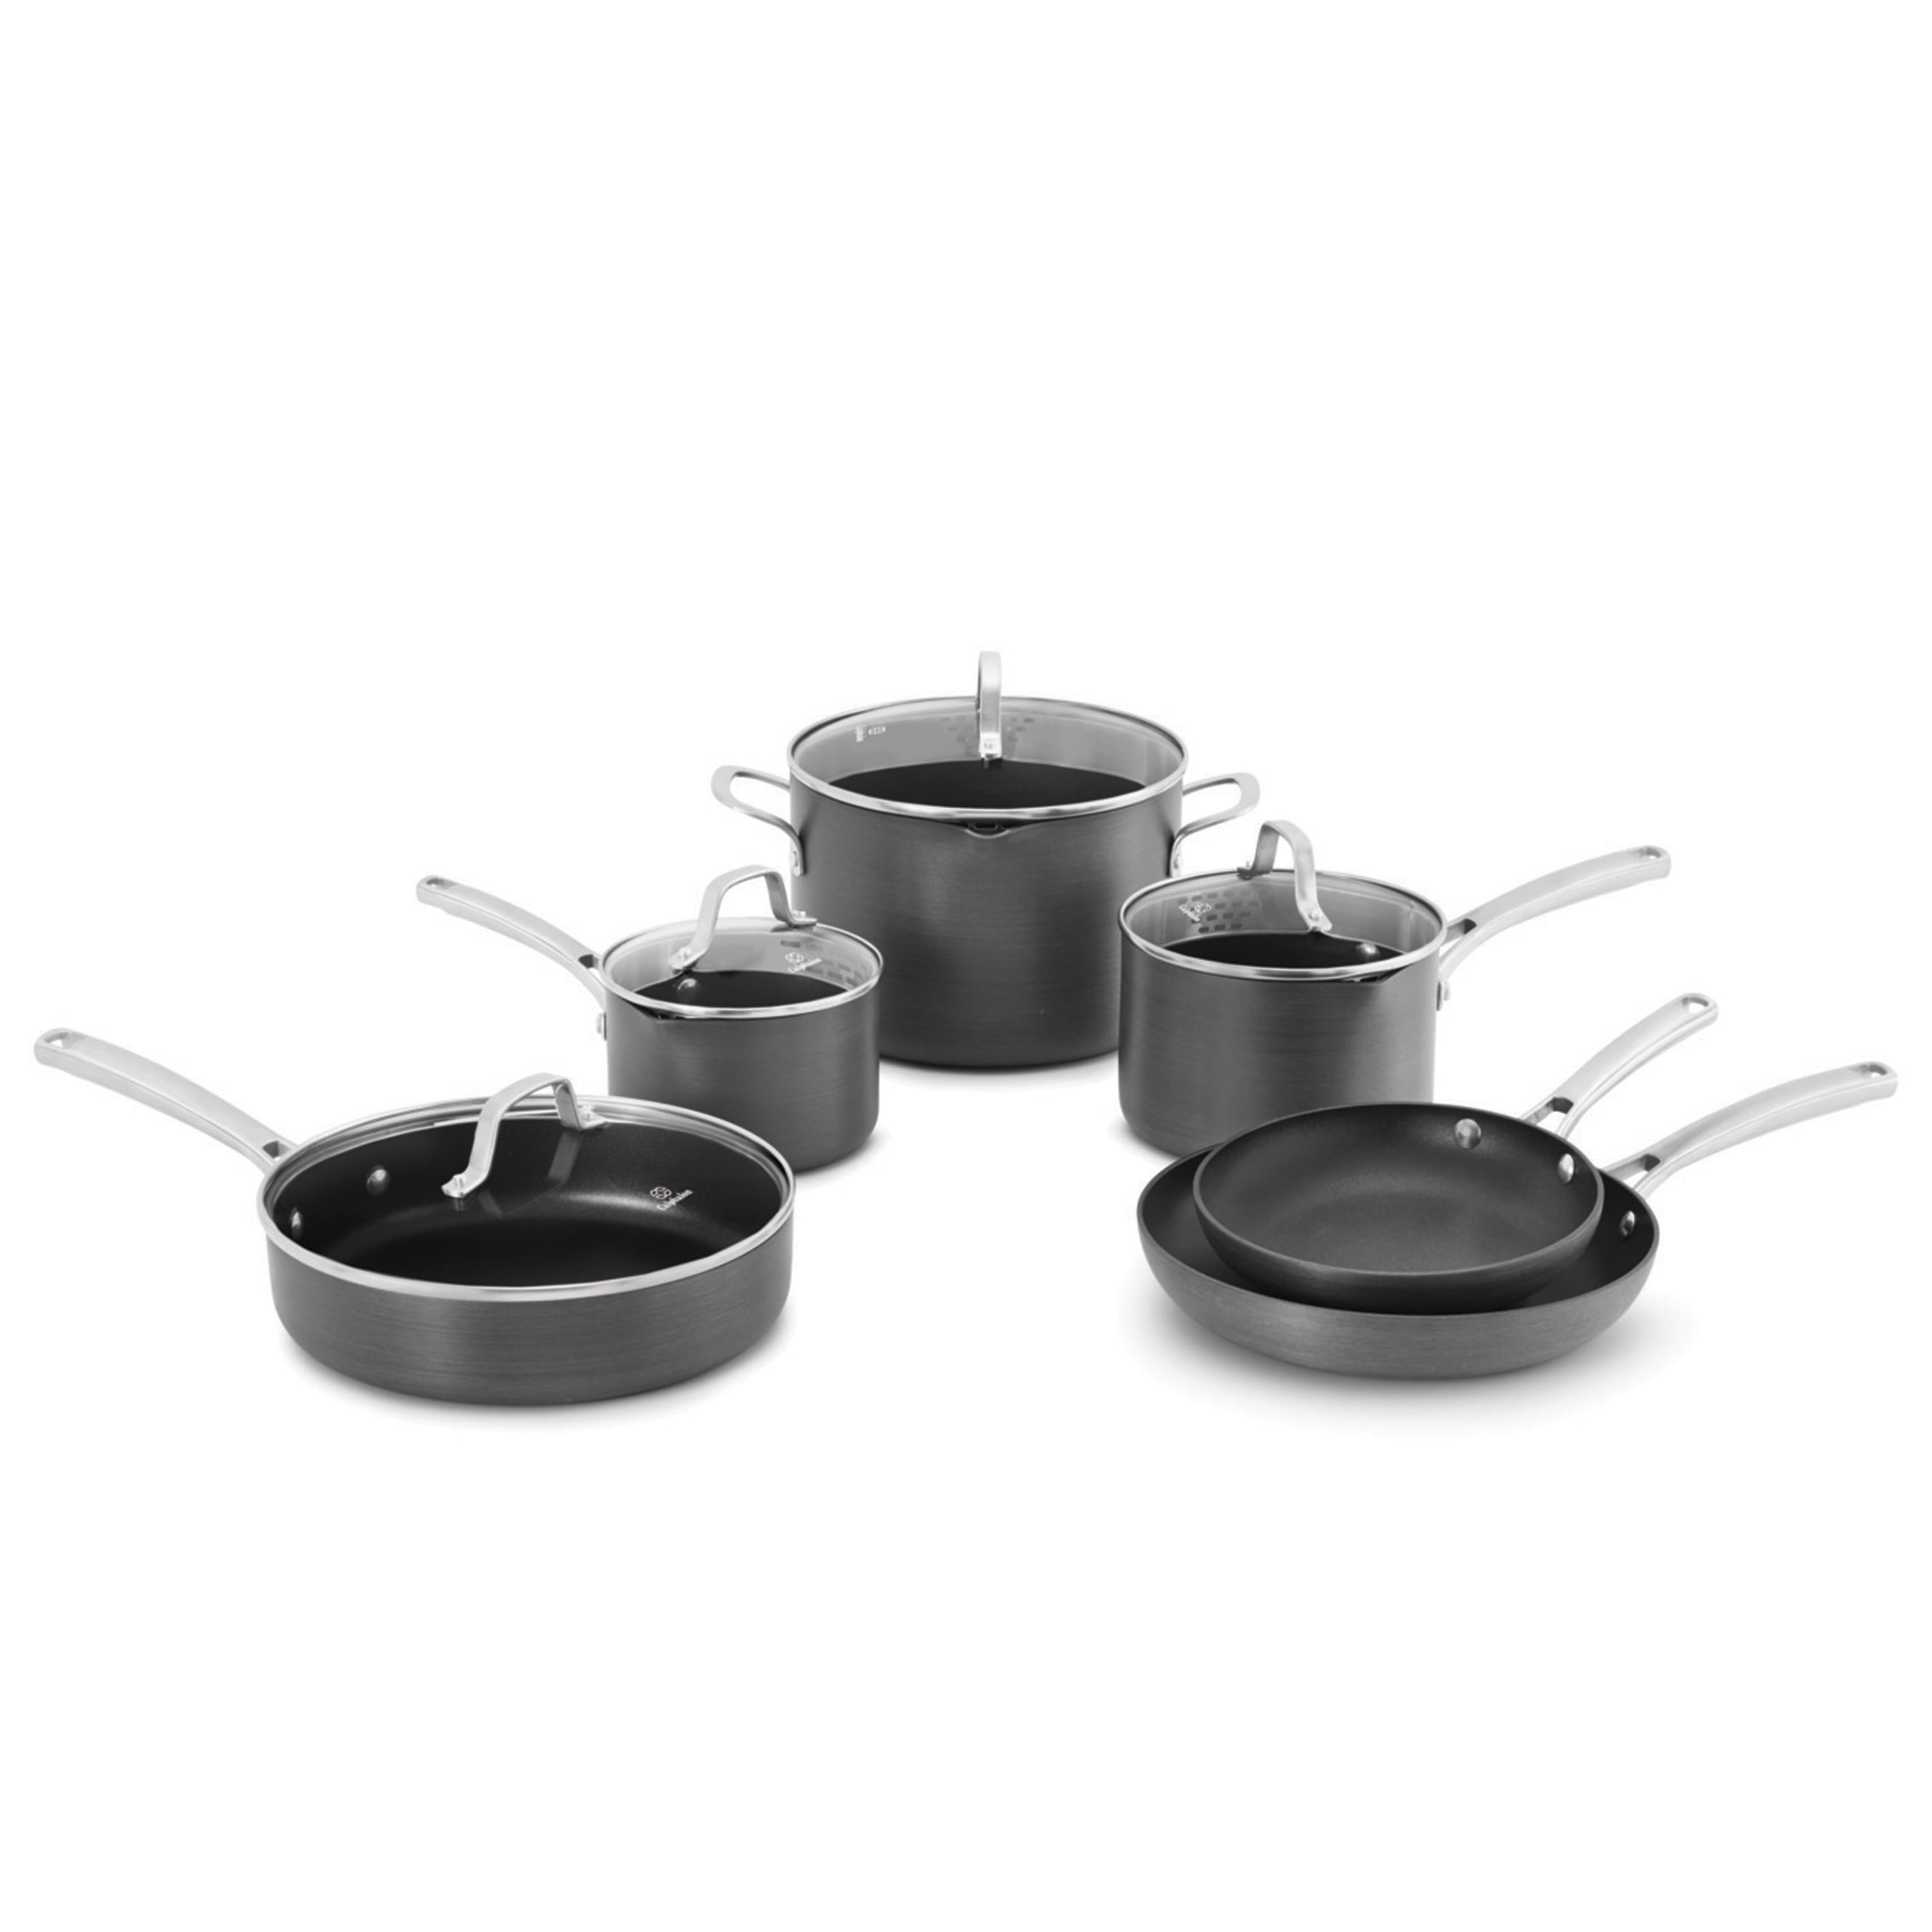 Calphalon 11-Piece Pots and Pans Set, Nonstick Kitchen Cookware with  Stay-Cool Handles, Dishwasher and Metal Utensil Safe, Black